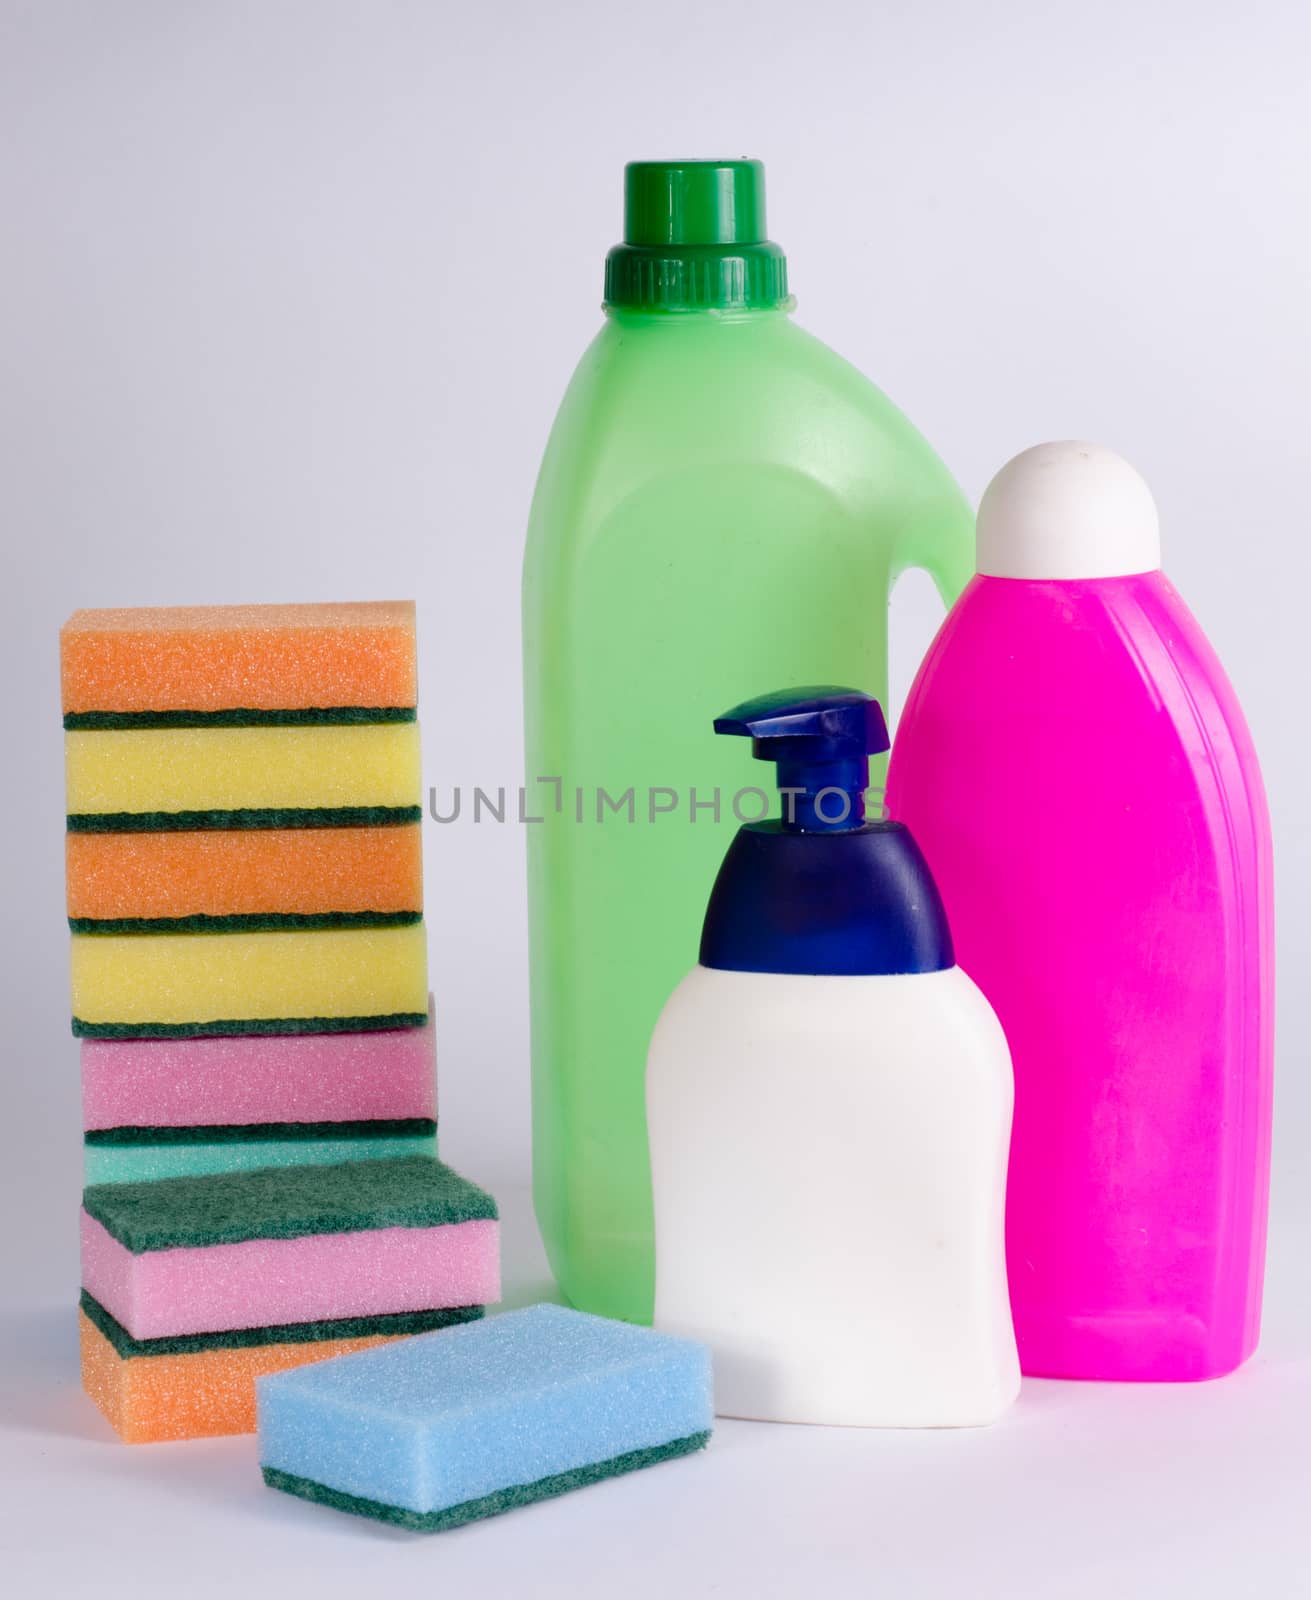 cleaning products by sarkao